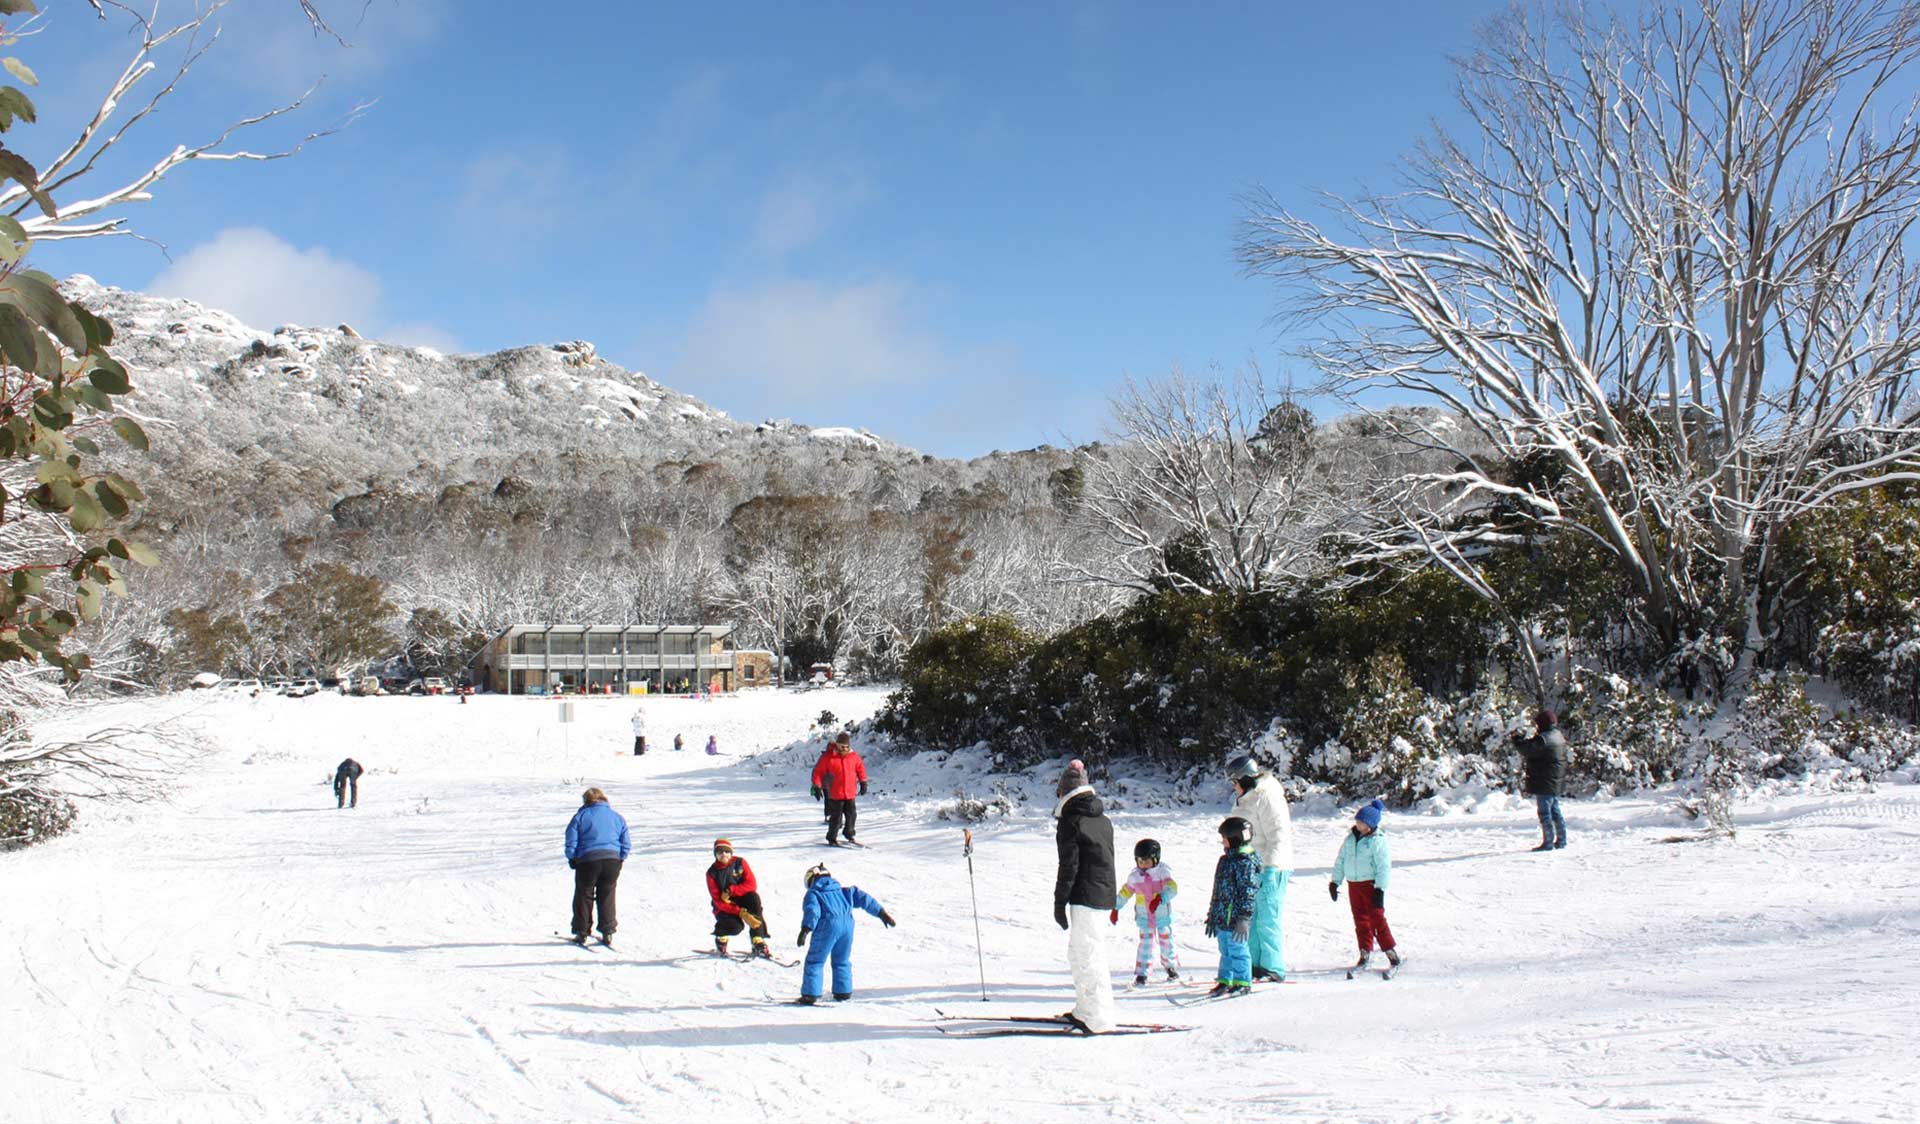 A family take a cross country skiing lesson at Dingo Dell at Mount Buffalo National Park